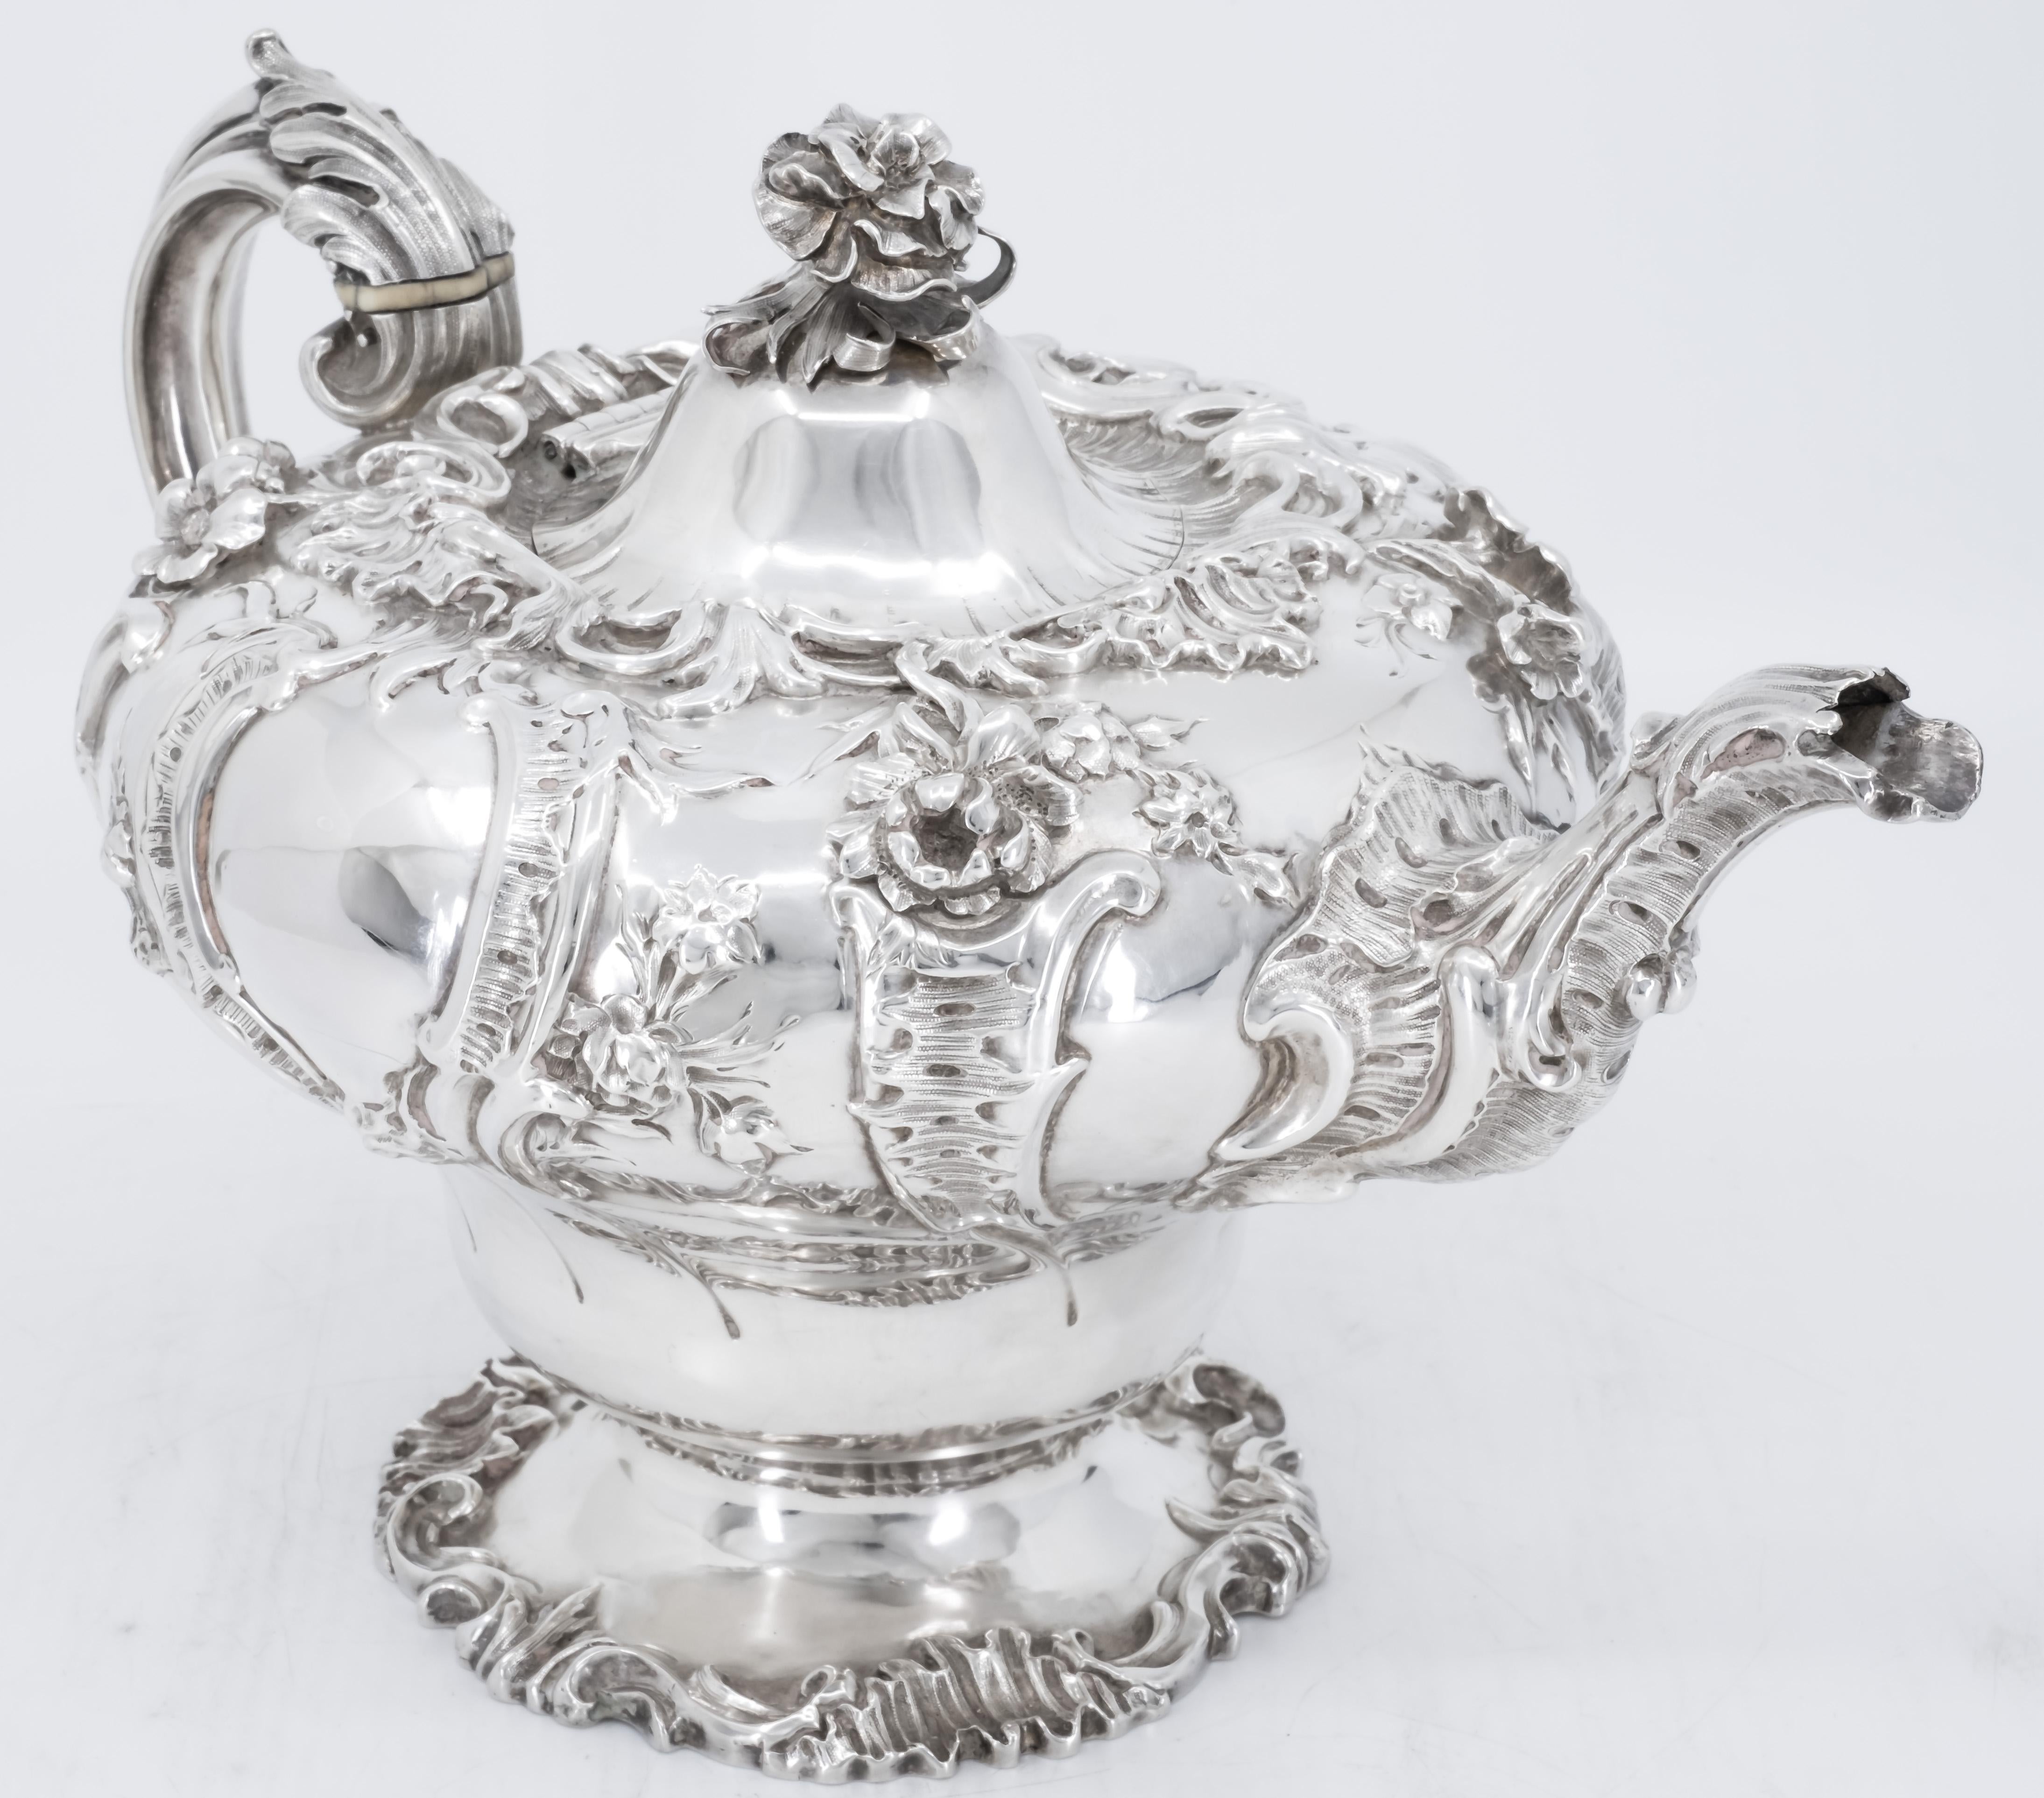 English Tea Services in Rococo Style, London Sterling Sliver 925, Early 19th Century For Sale